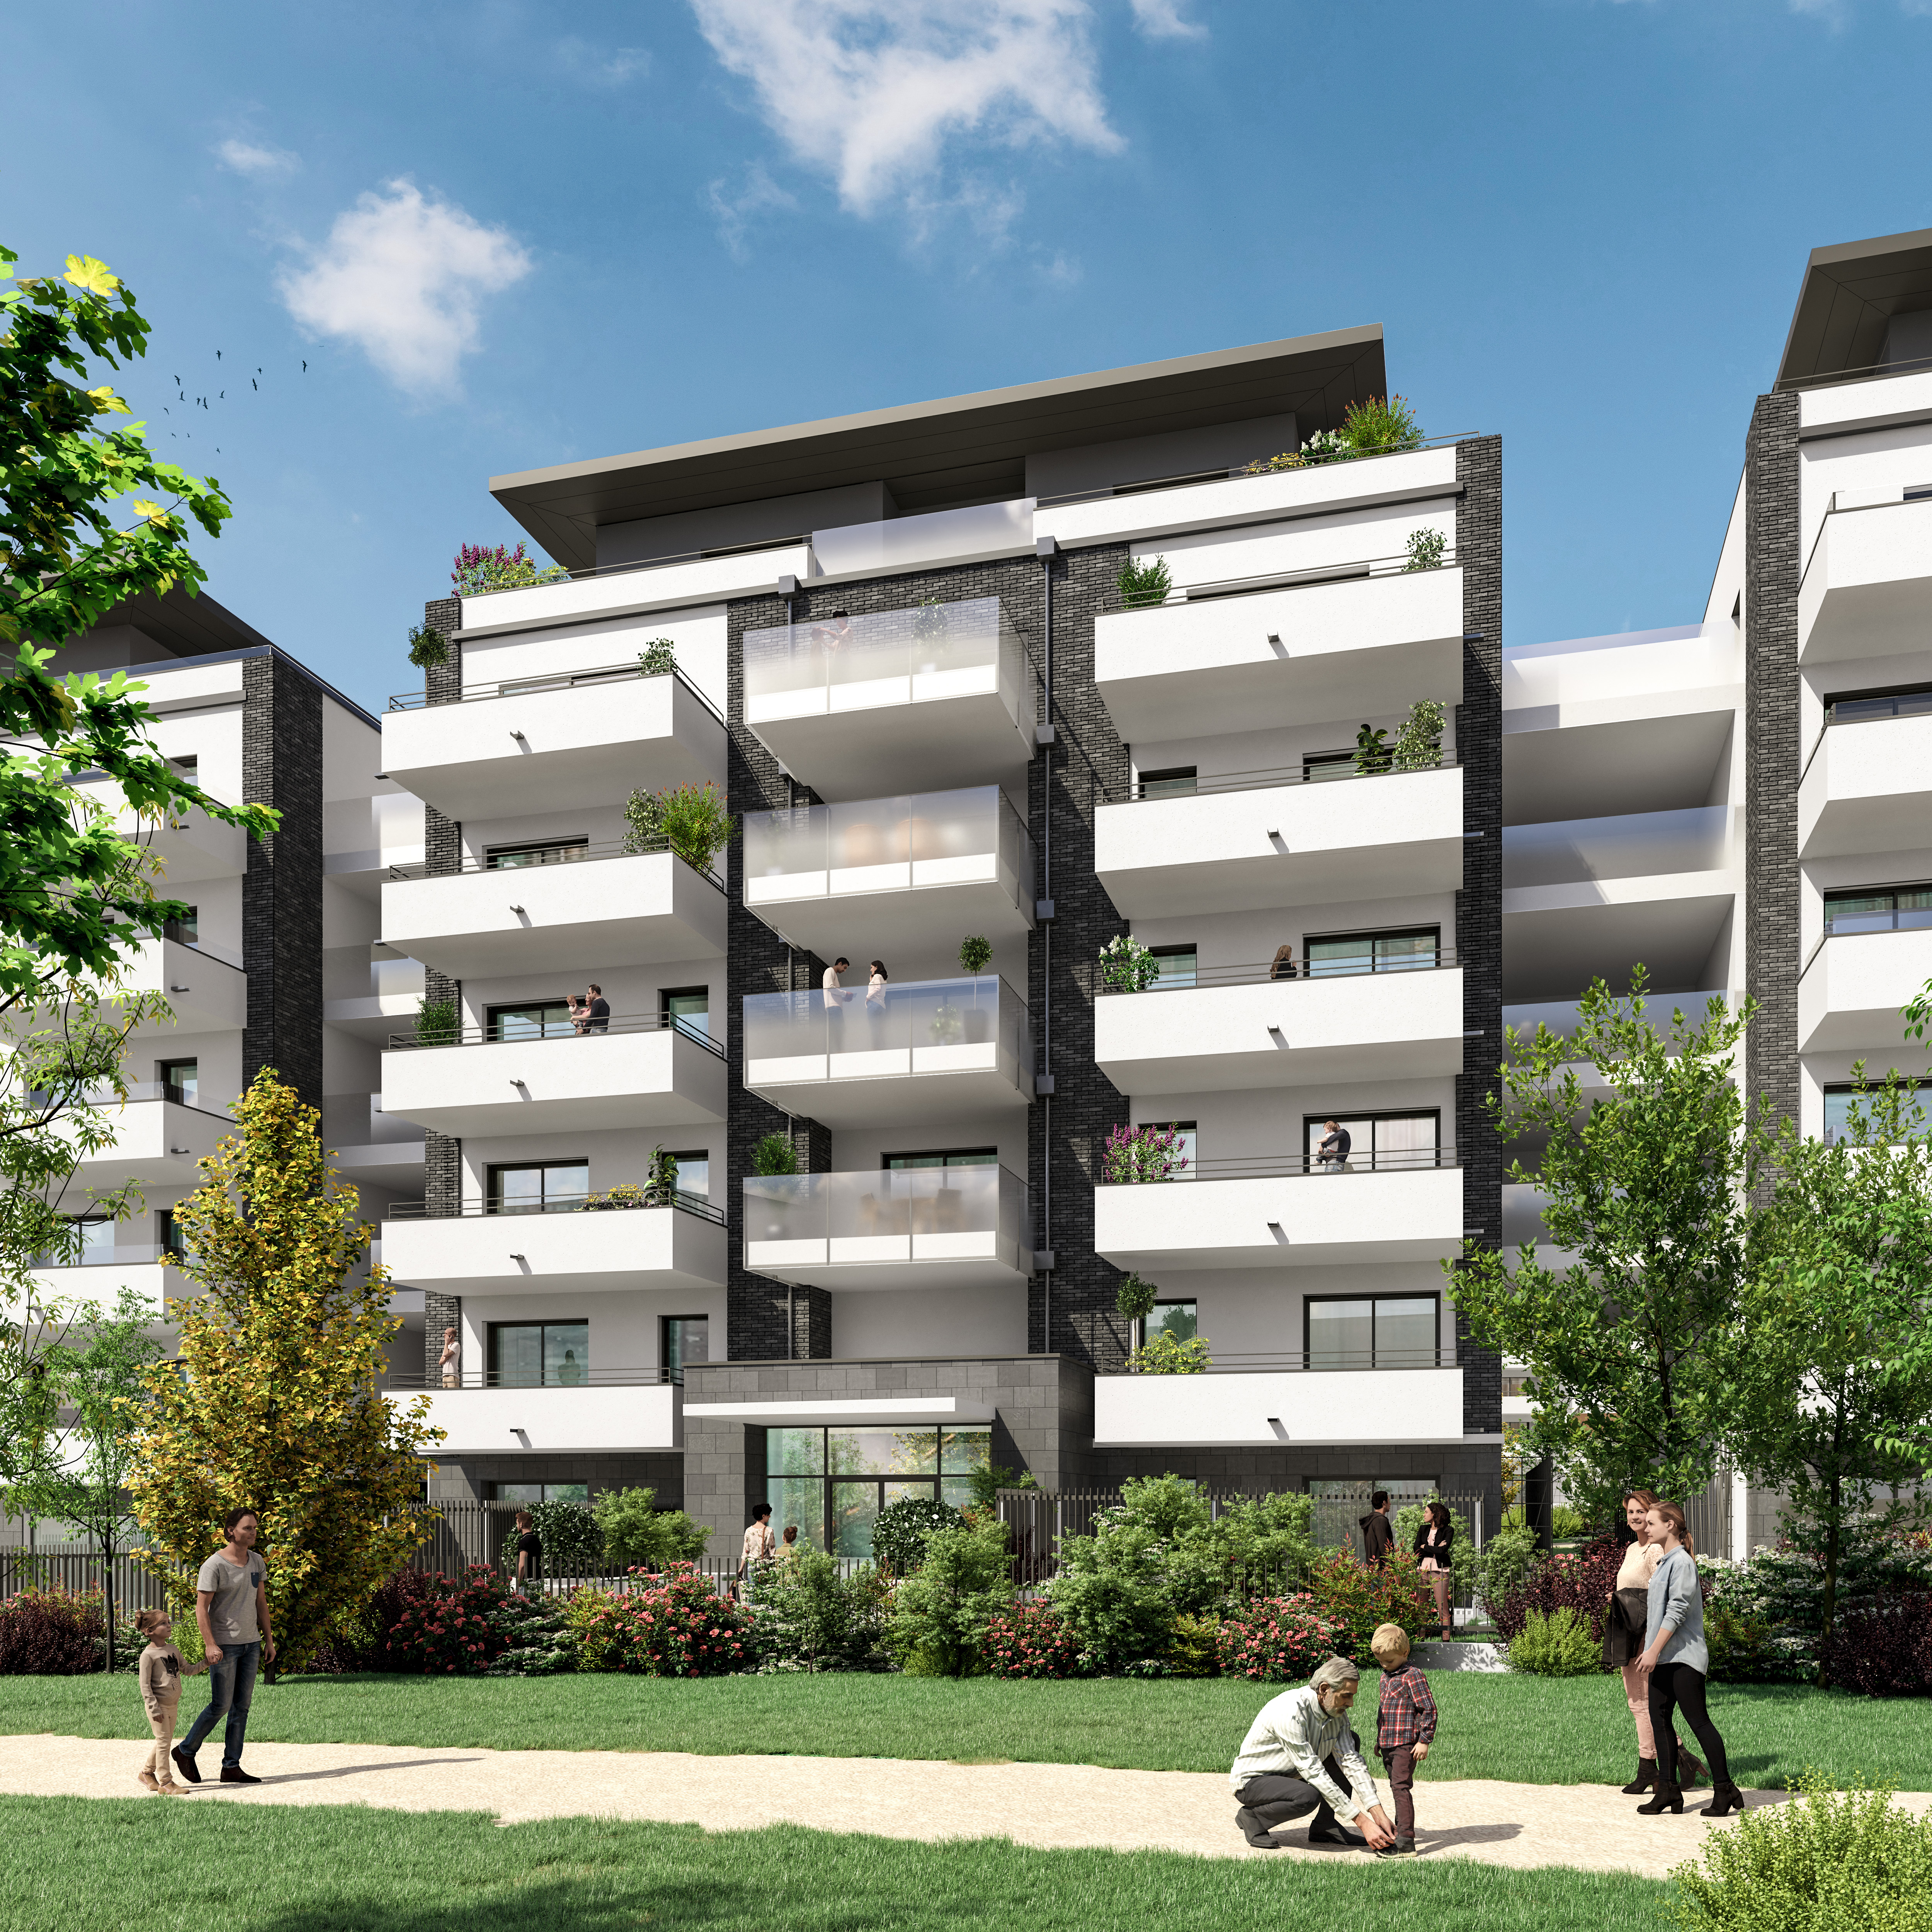 Programme immobilier neuf LES ALLÉES BLATIN - TRANCHE 2